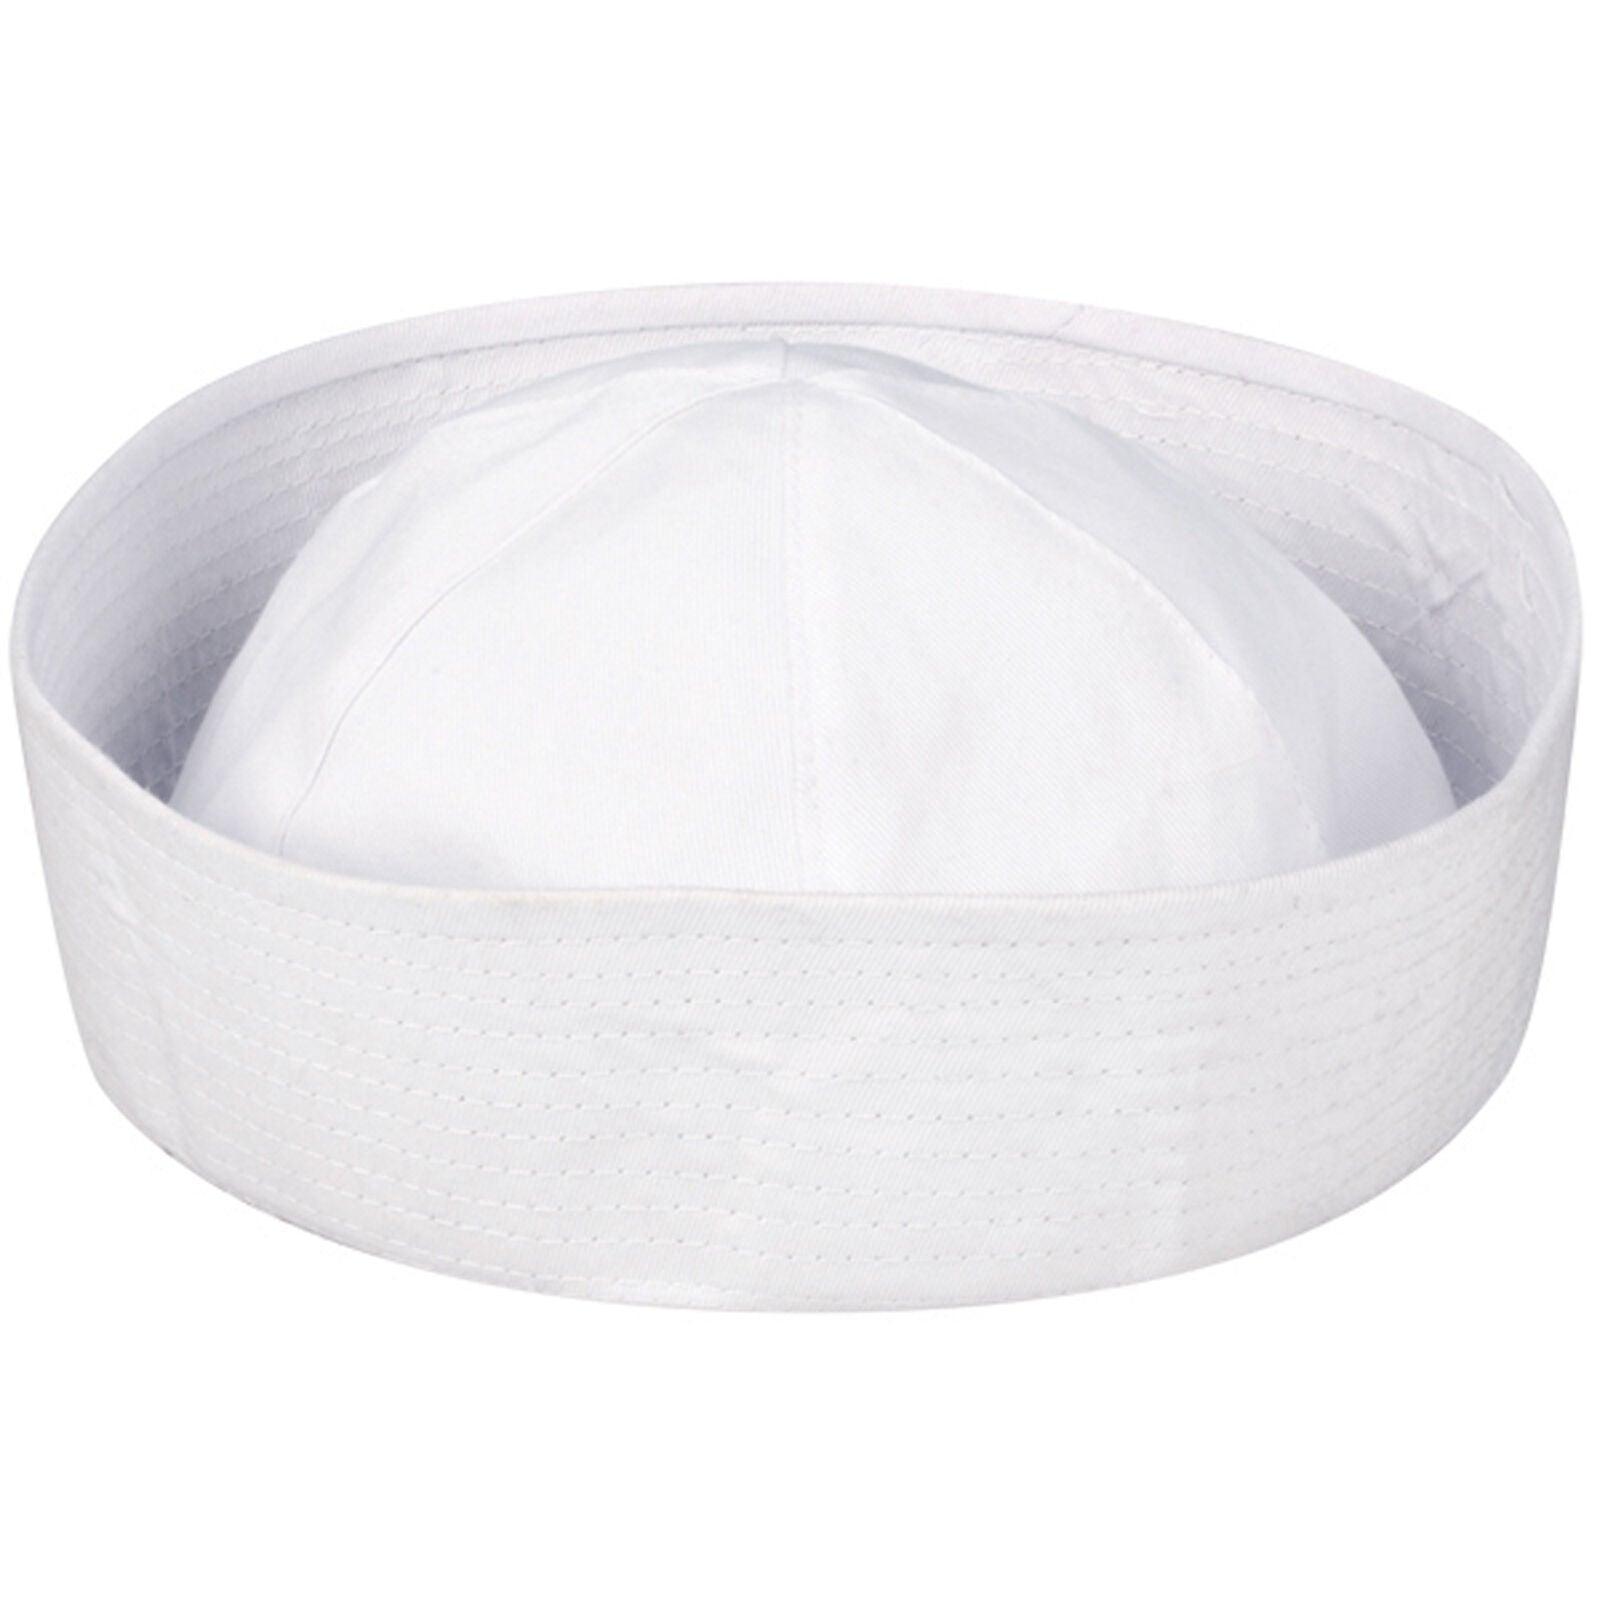 Adult Sailor White Doughboy Hat Navy Marine Sea Party Fancy Dress Accessory - Labreeze